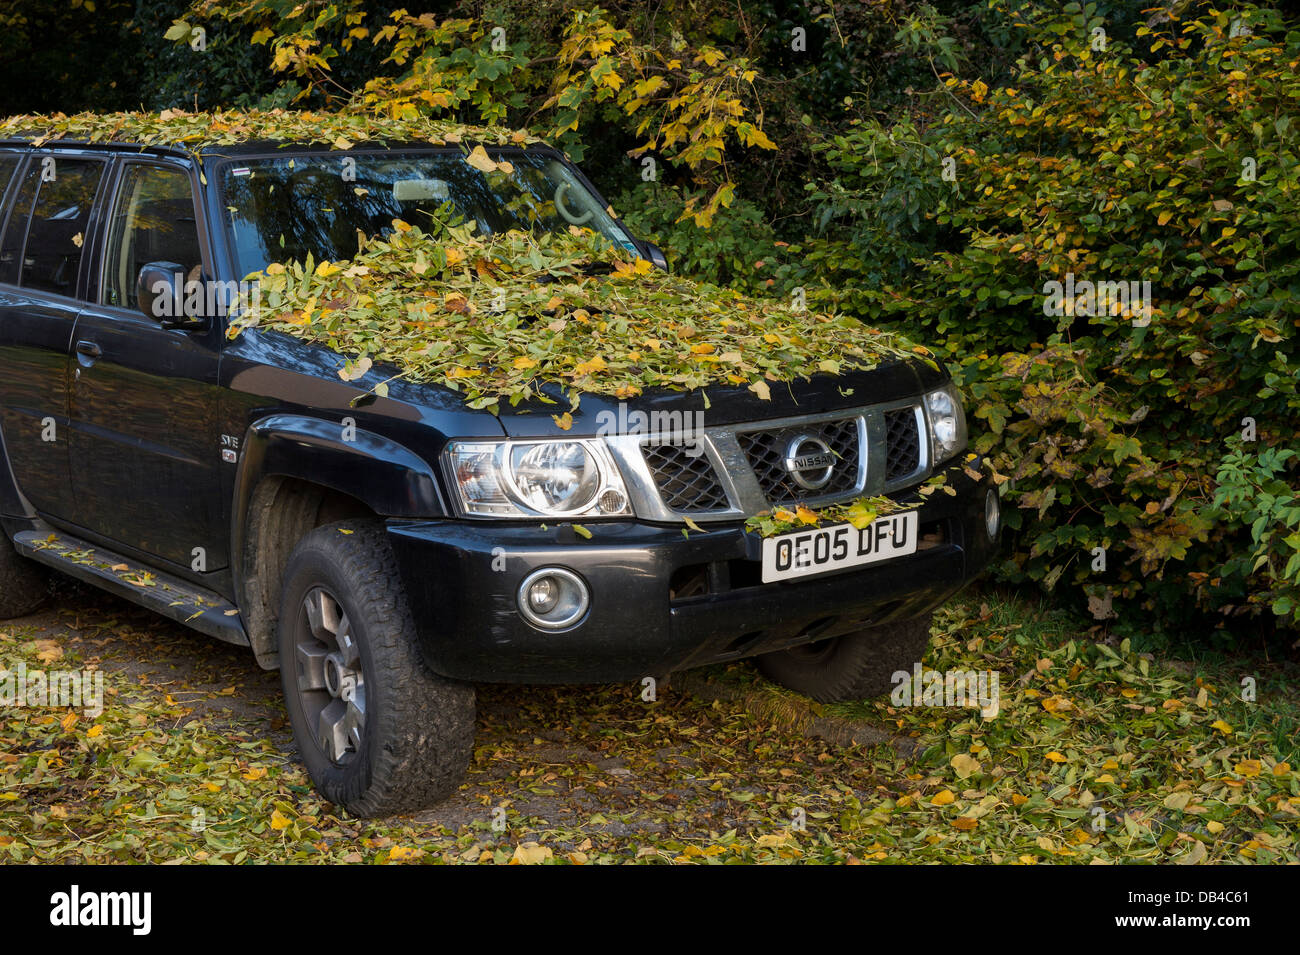 Autumn time and the bonnet & roof of a Nissan Navara parked by trees, are blanketed in a pile of fallen leaves - Baildon, West Yorkshire, England, UK. Stock Photo